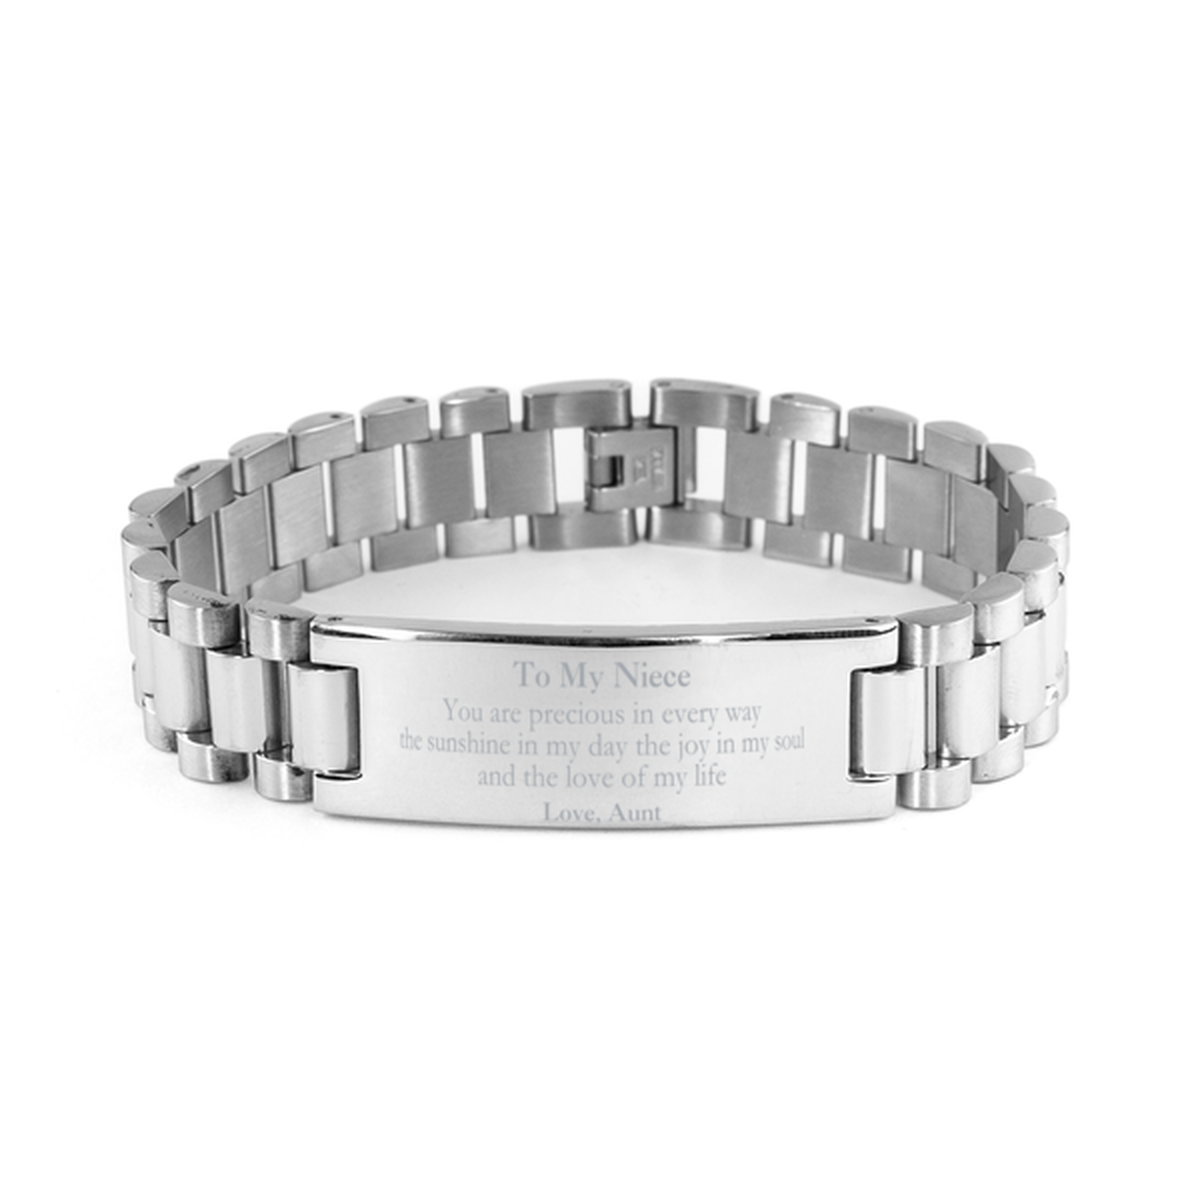 Graduation Gifts for Niece Ladder Stainless Steel Bracelet Present from Aunt, Christmas Niece Birthday Gifts Niece You are precious in every way the sunshine in my day. Love, Aunt